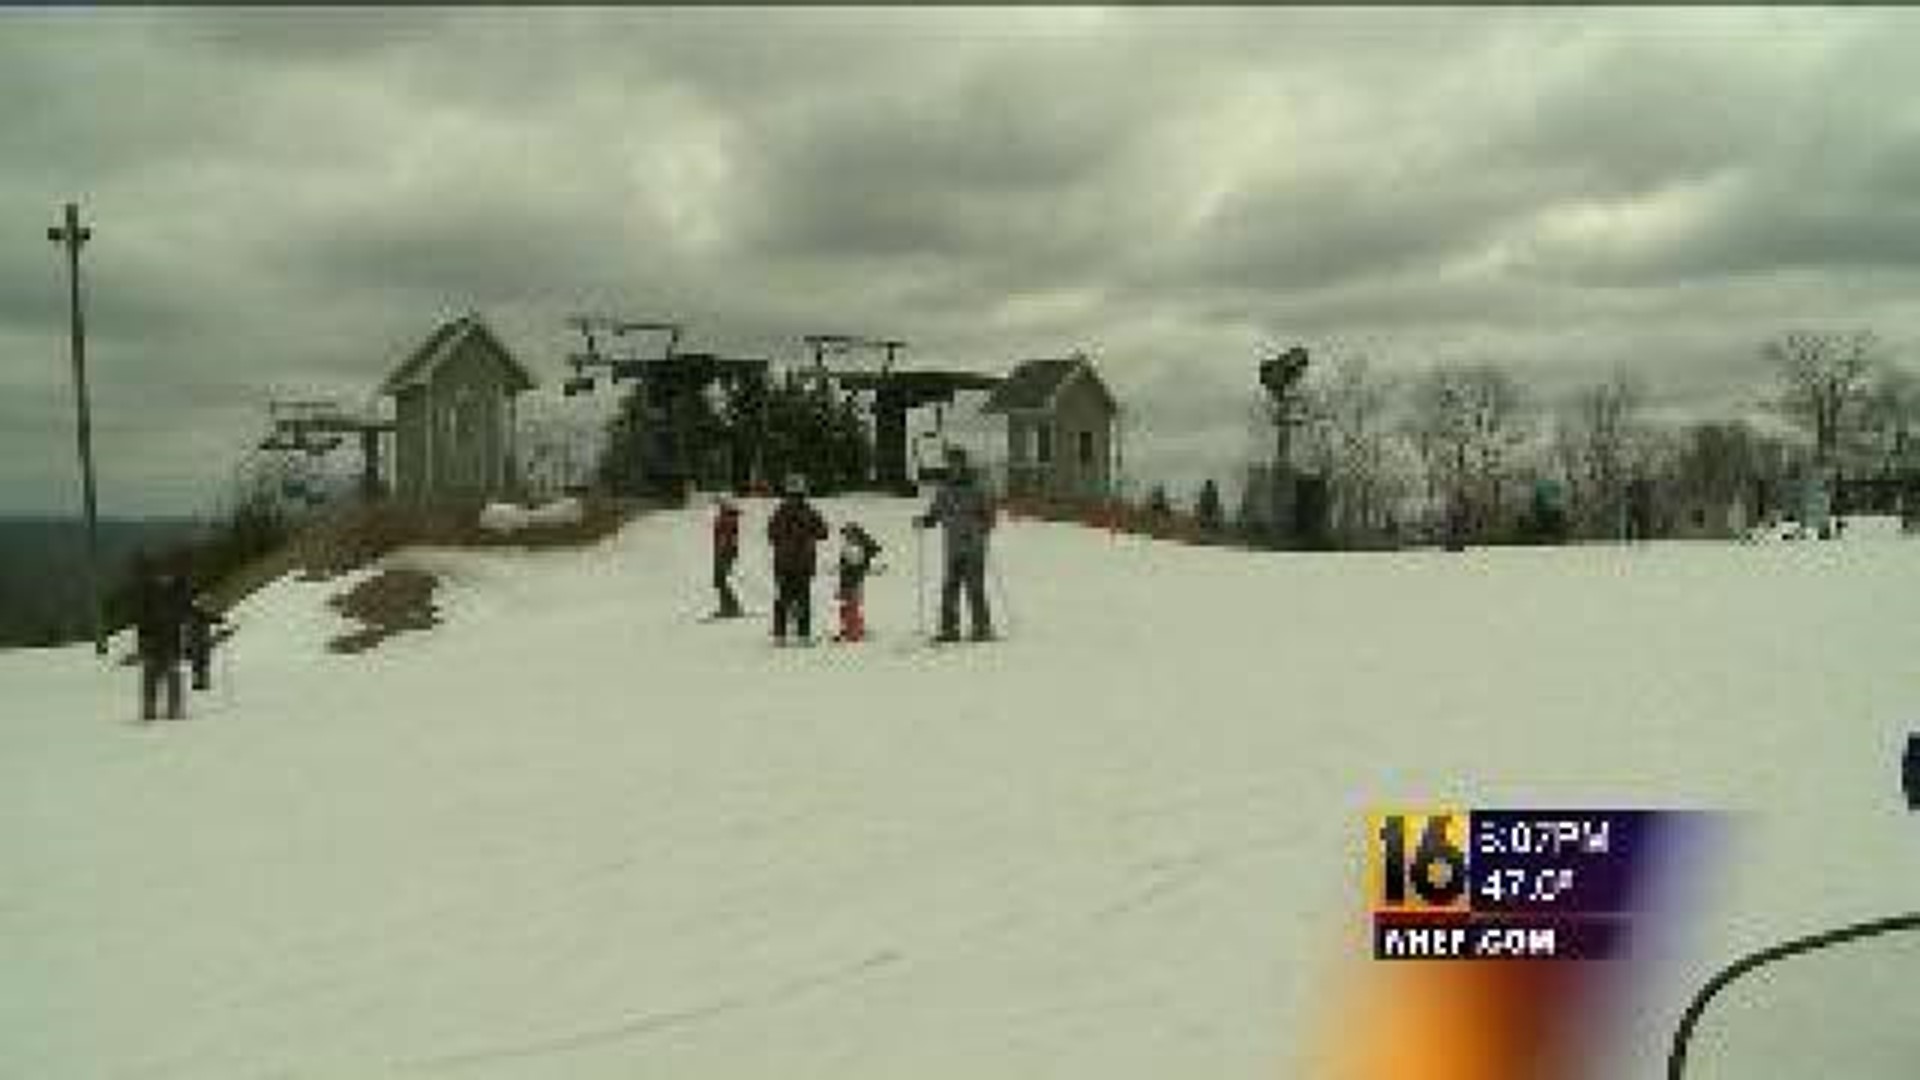 Snow Bunnies Hit Slopes For Easter Weekend